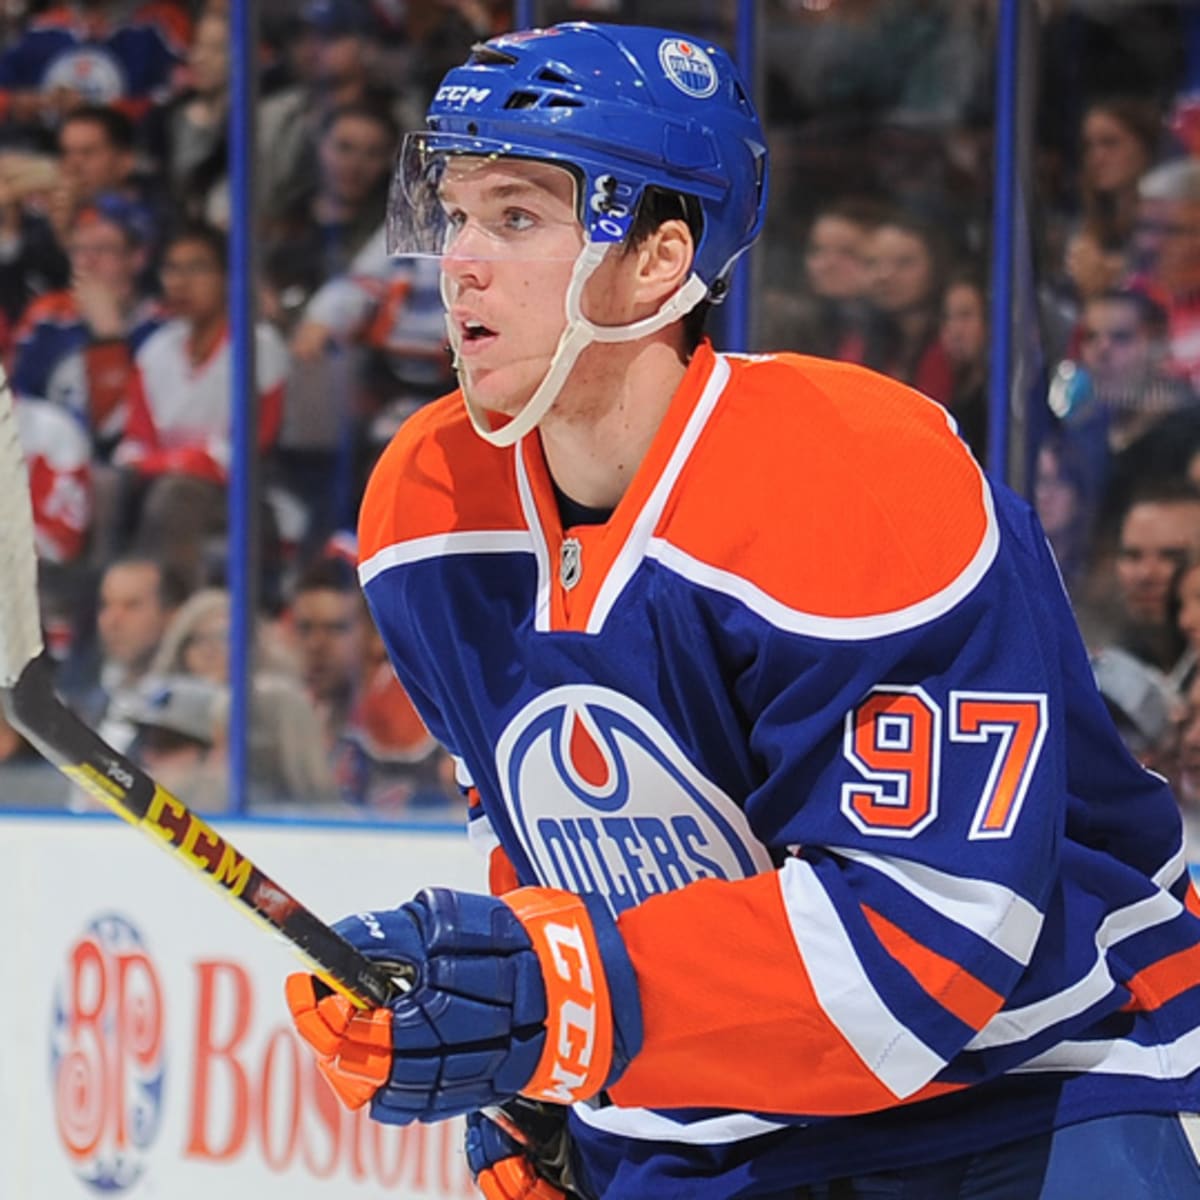 Download Caption: Connor McDavid in action during a professional